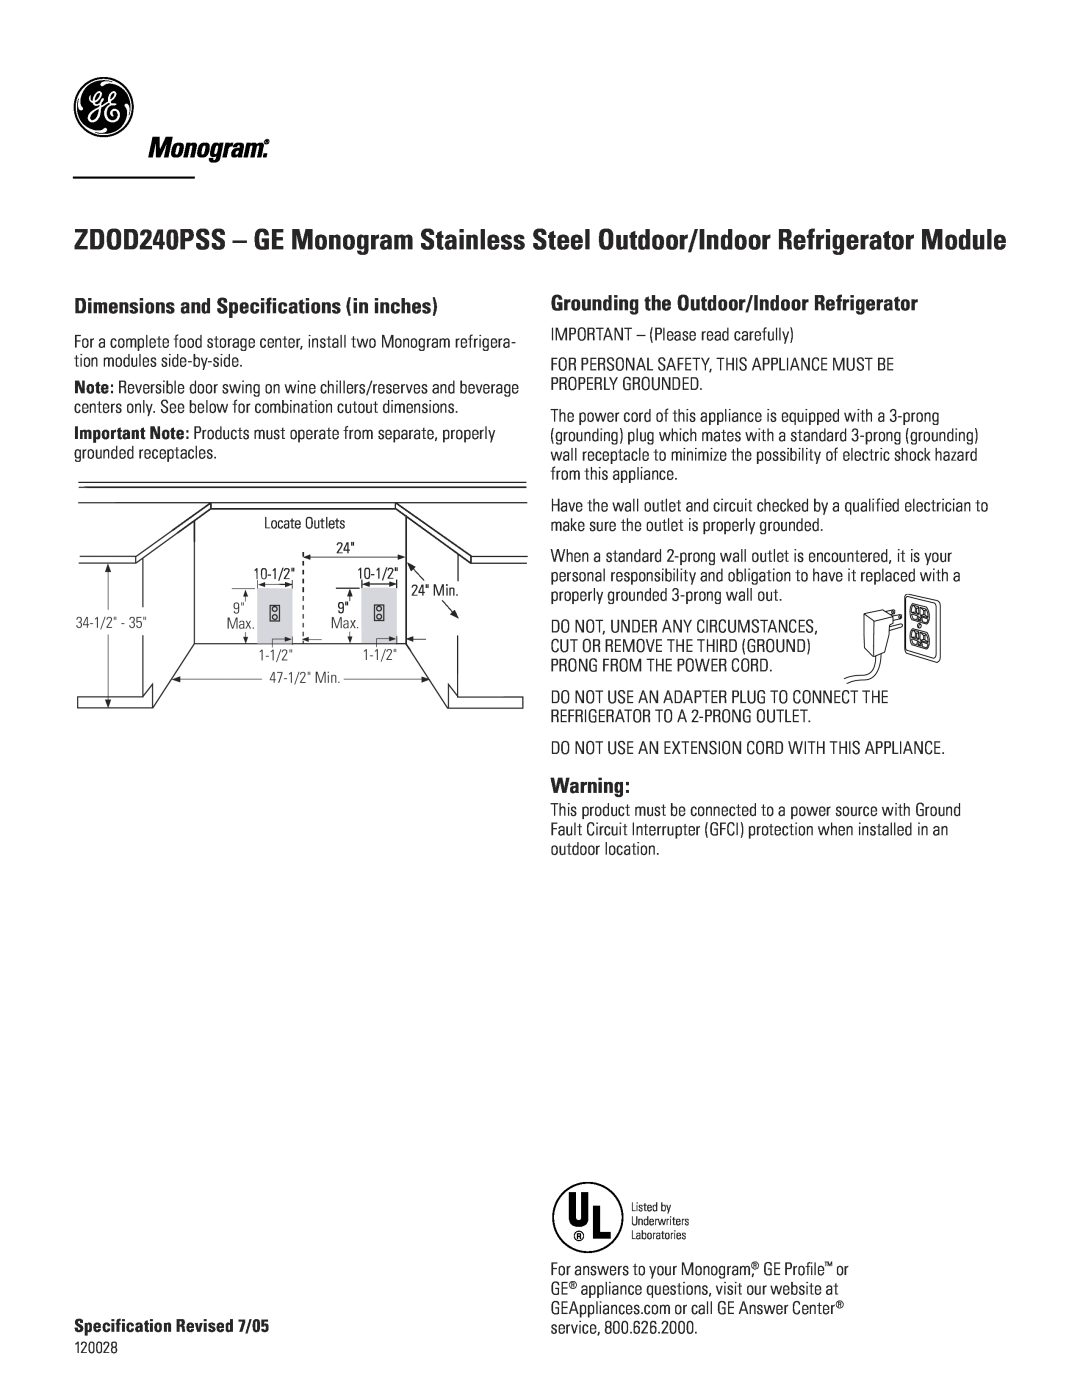 GE Monogram ZDOD240PSS dimensions Dimensions and Specifications in inches, Grounding the Outdoor/Indoor Refrigerator 